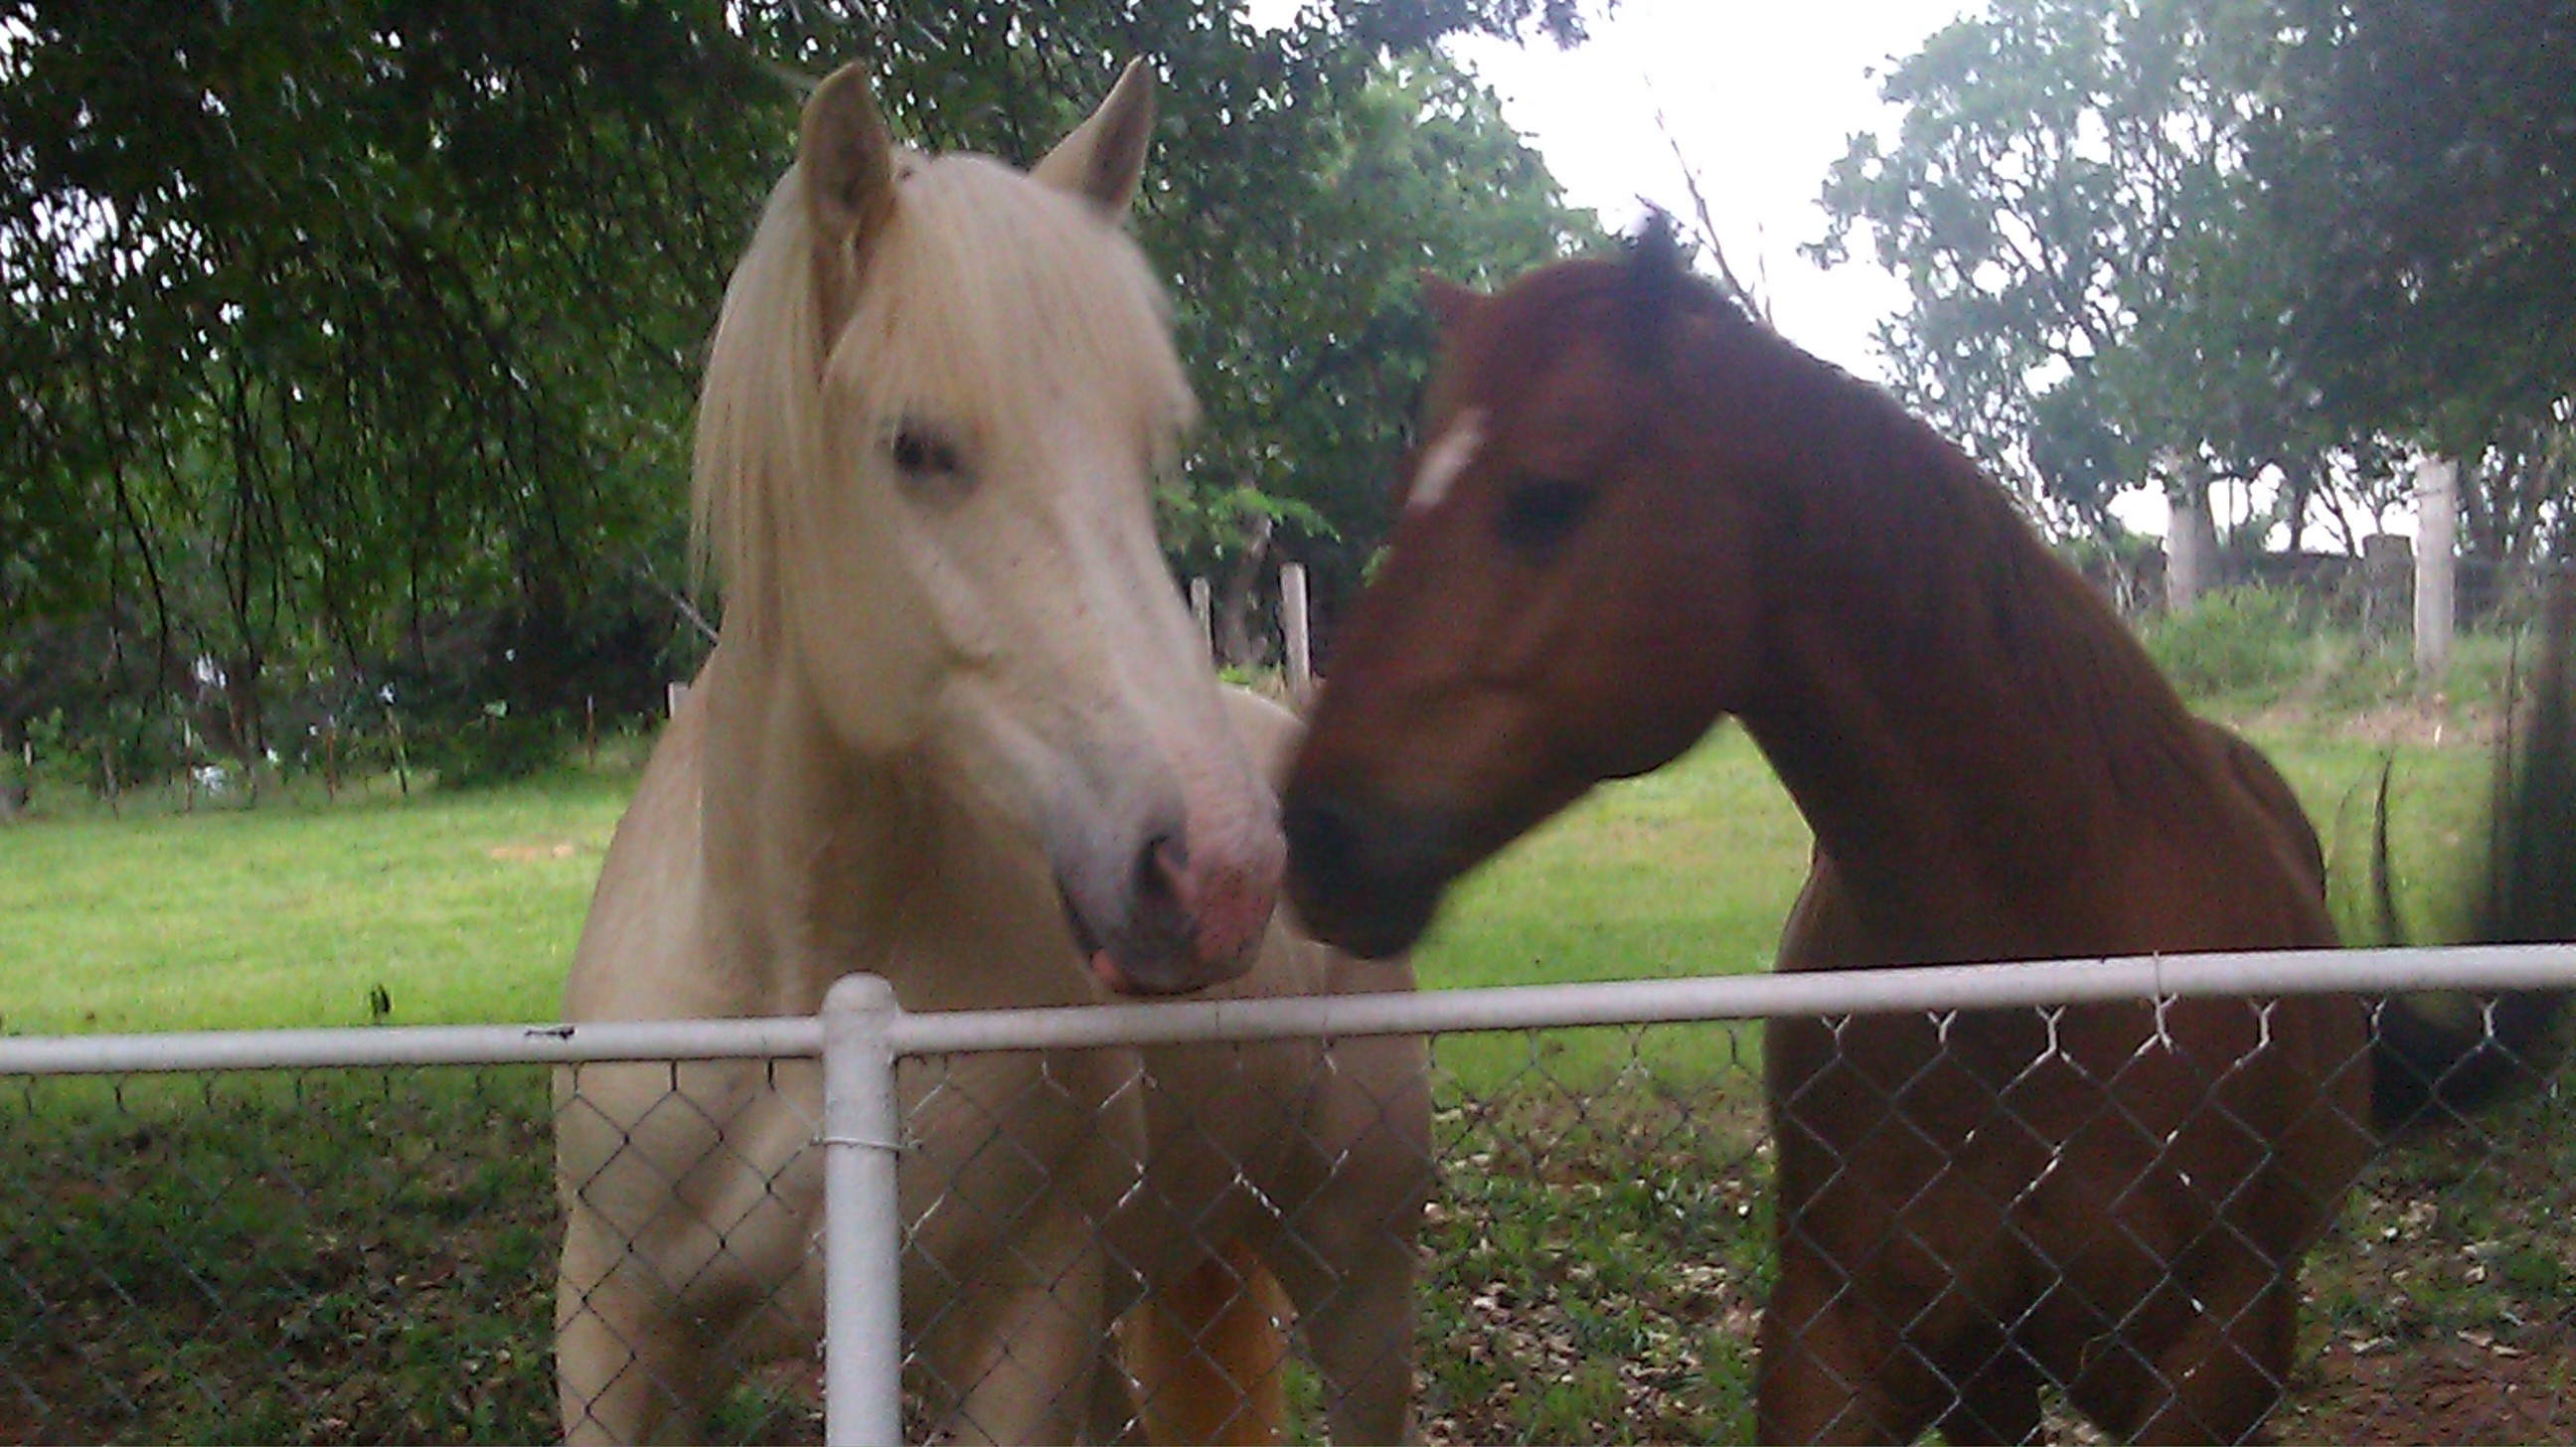 Looking for owner of these two horses on my property